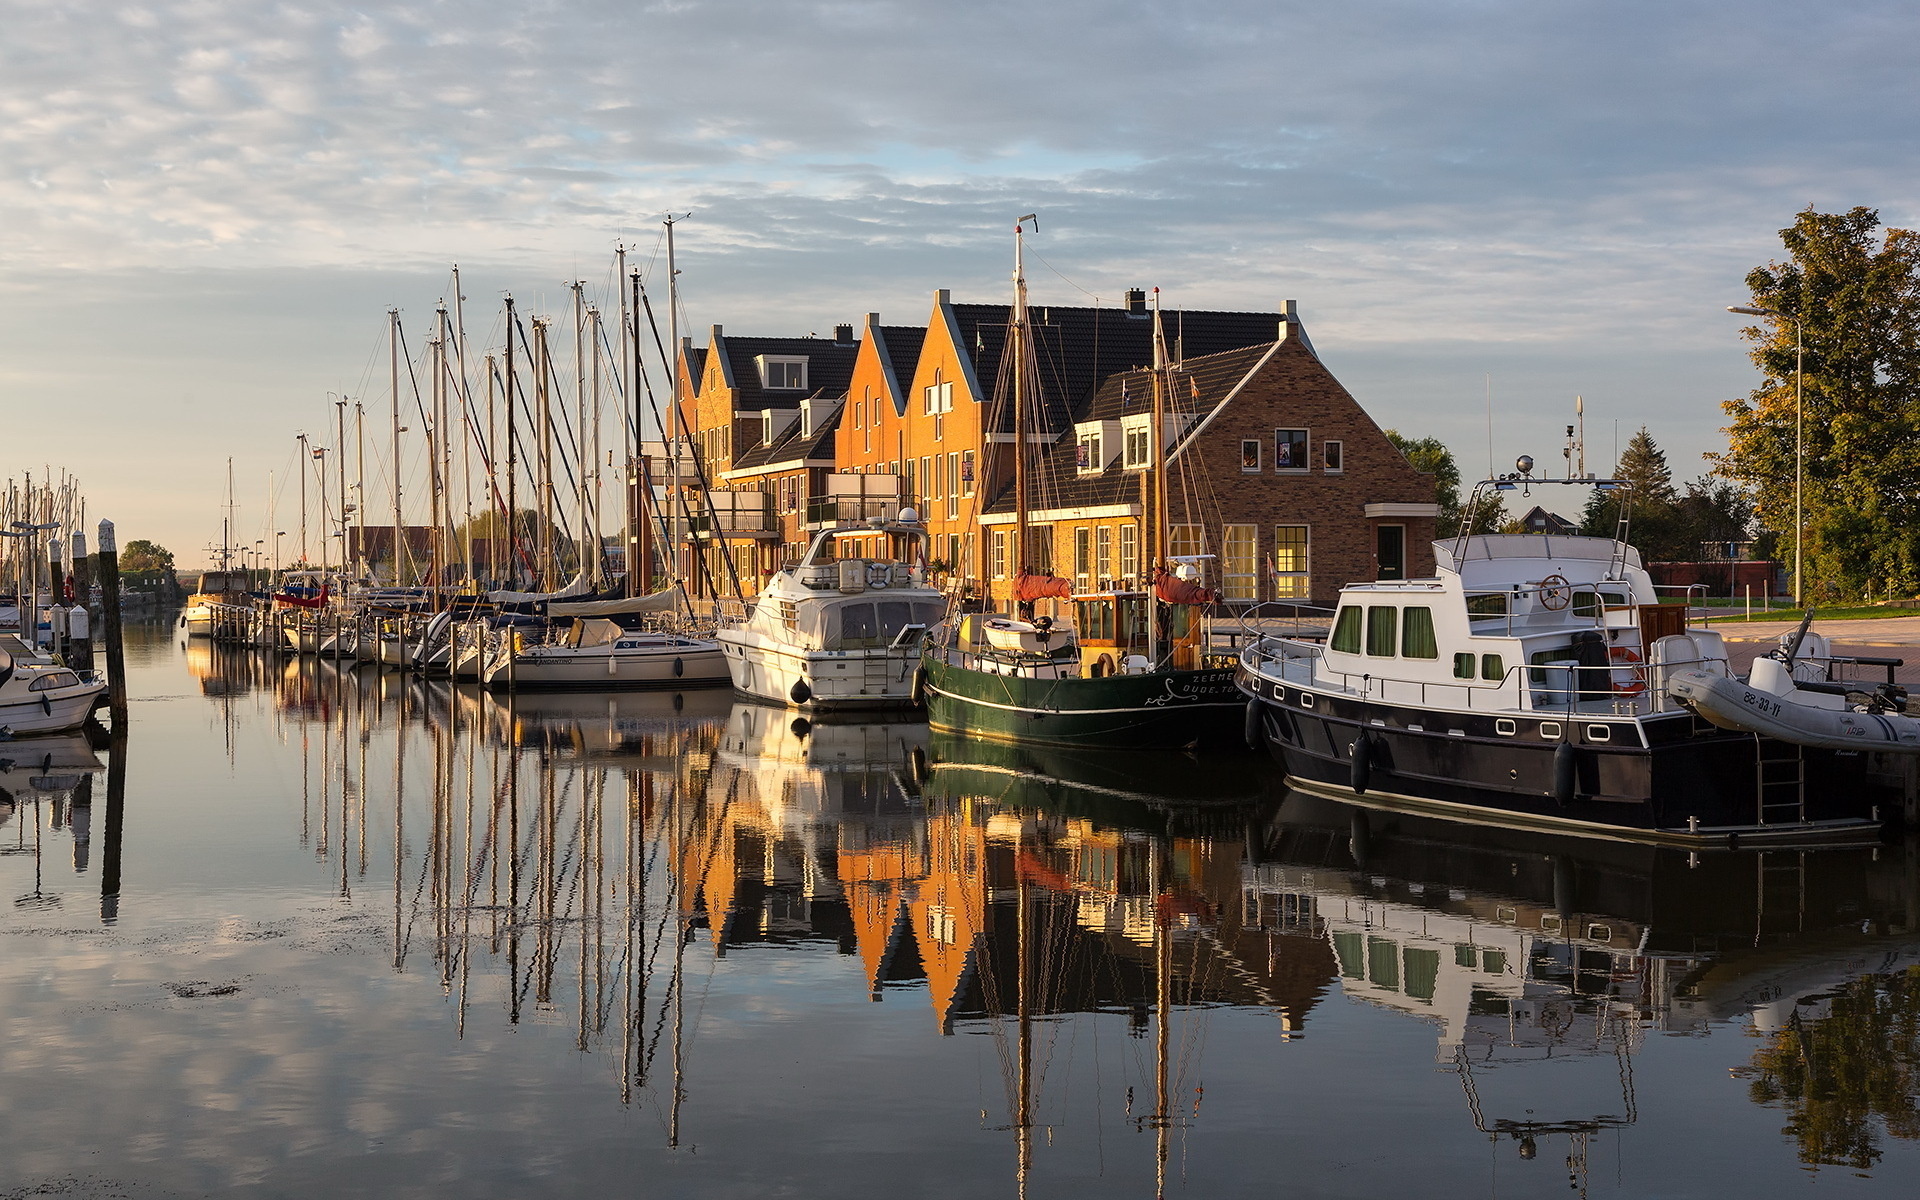 photography, reflection, boat, building, house, scenic, town, wharf